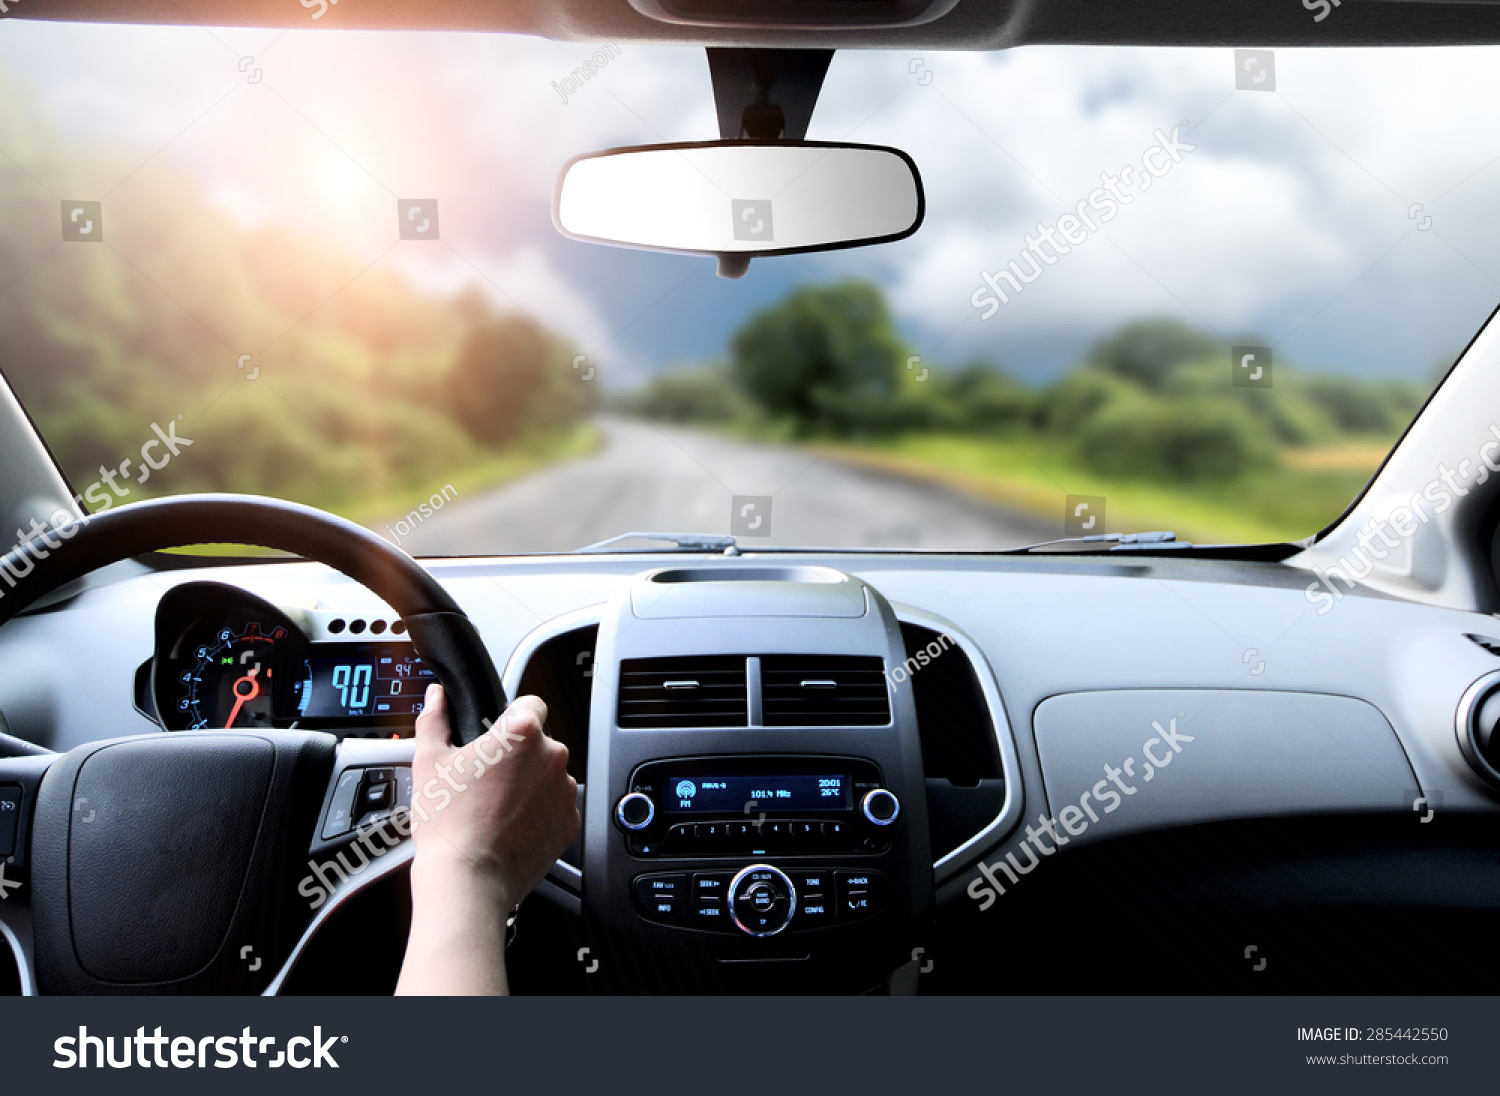 Driver's hands on the steering wheel inside of a car #285442550